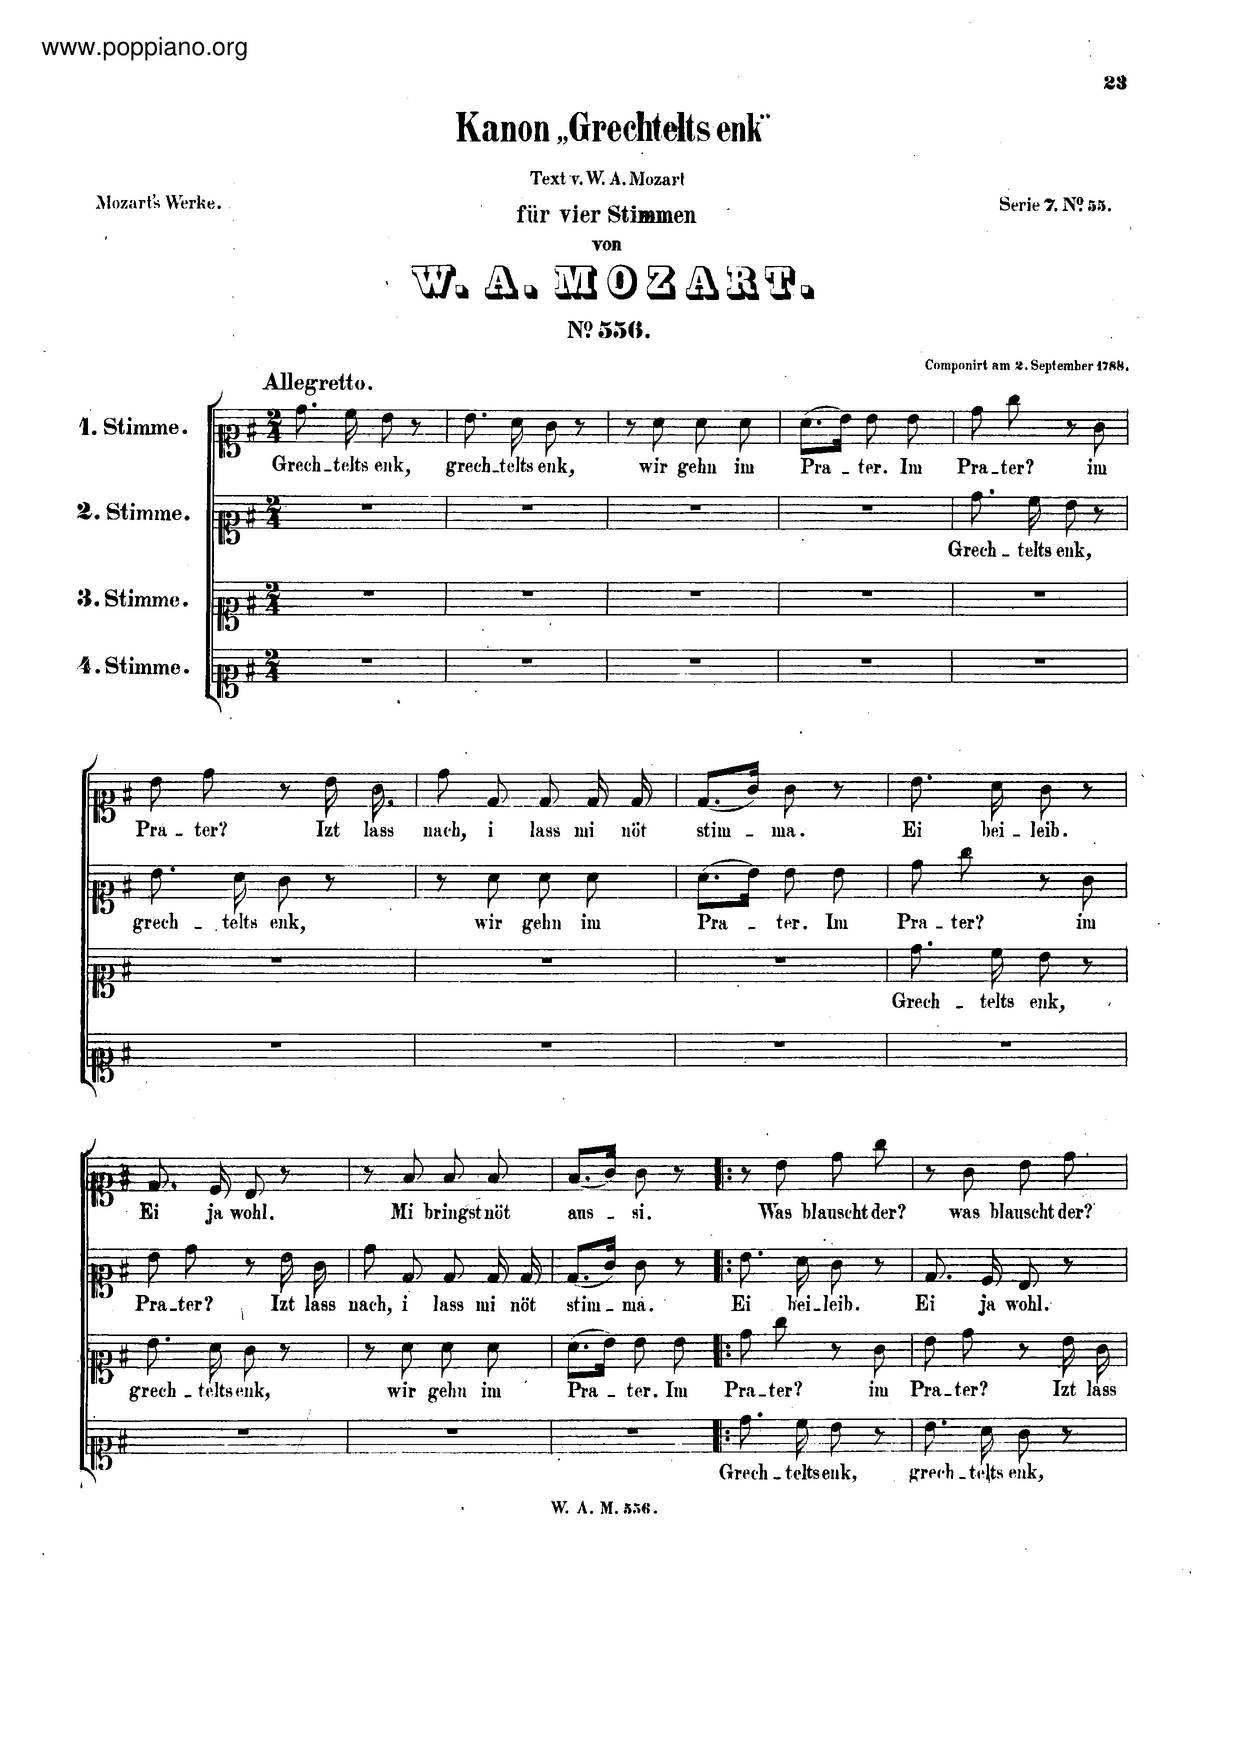 Canon For 4 Voices In G Major, K. 556 Score